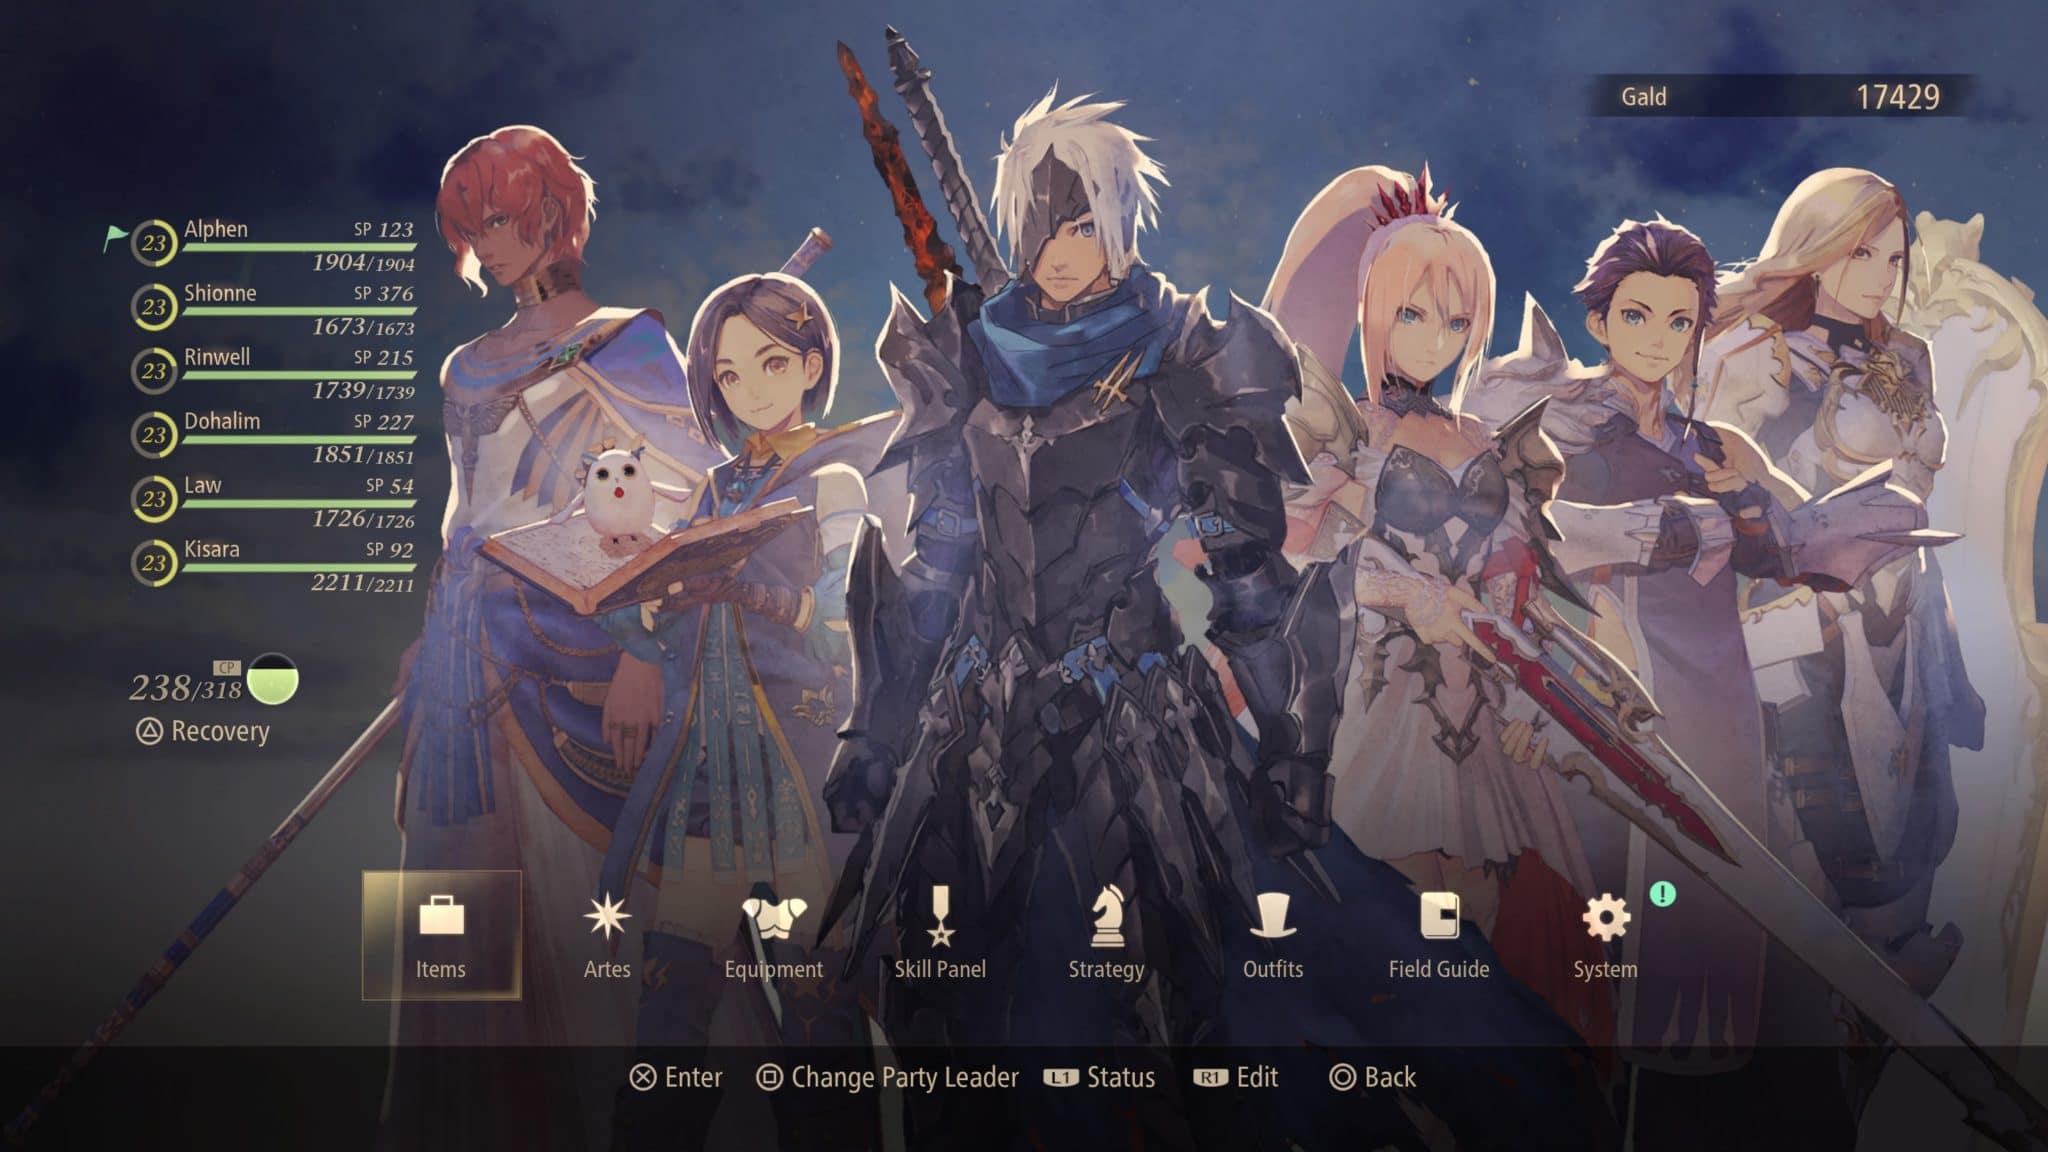 Tales of Arise - Reviews